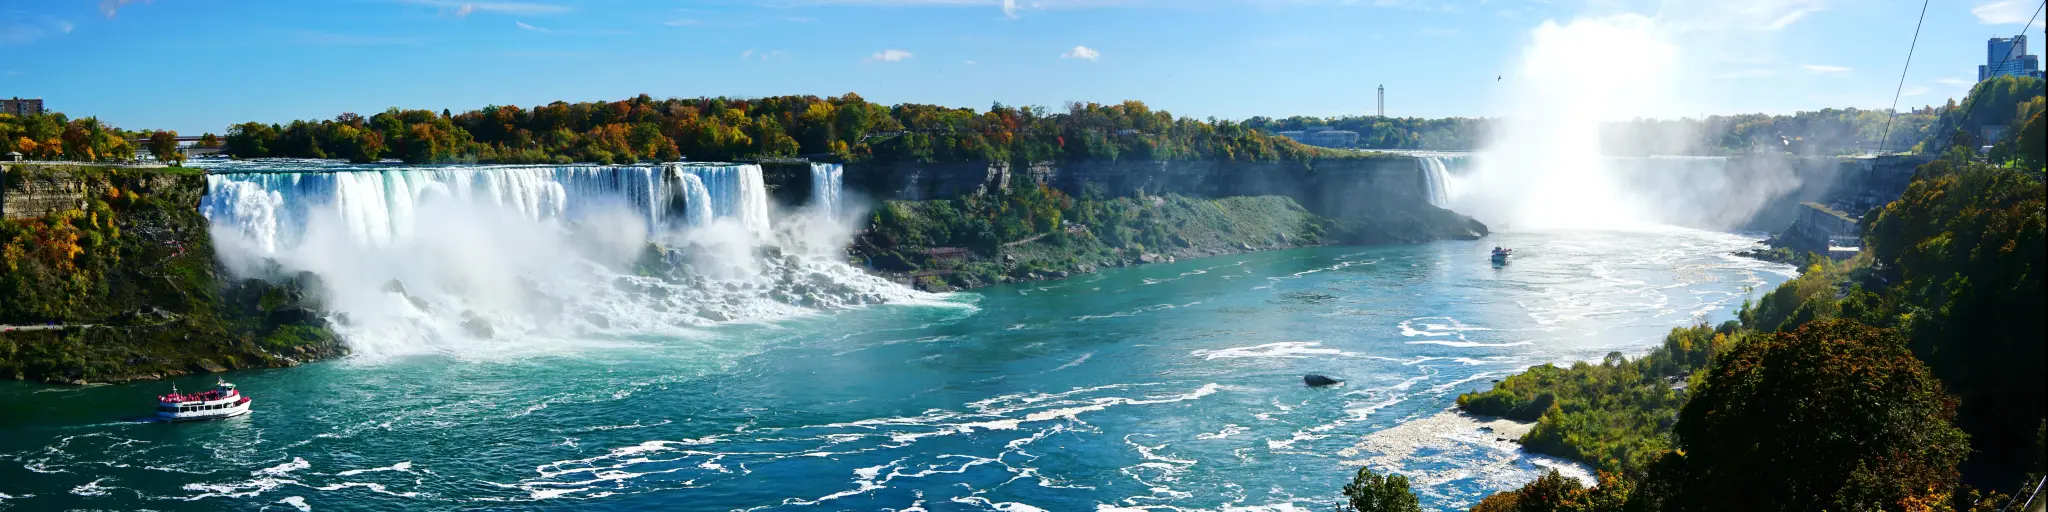 Niagara Falls, USA/Canada taken as a panoramic shot of the waterfalls on a sunny day with blue sky and boats in the water in the foreground. 